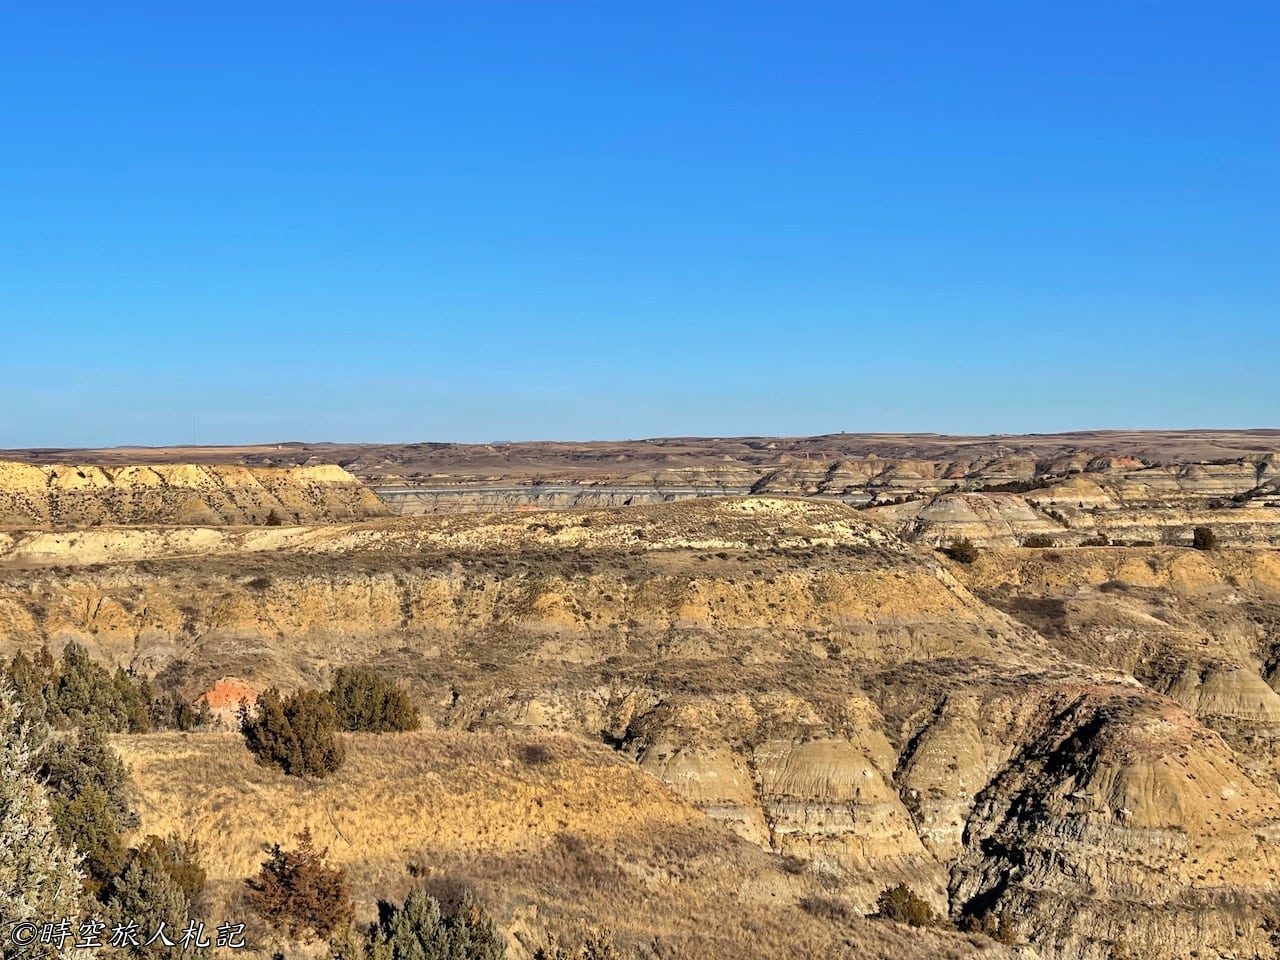 Theodore roosevelt national park,north unit,羅斯福國家公園 20